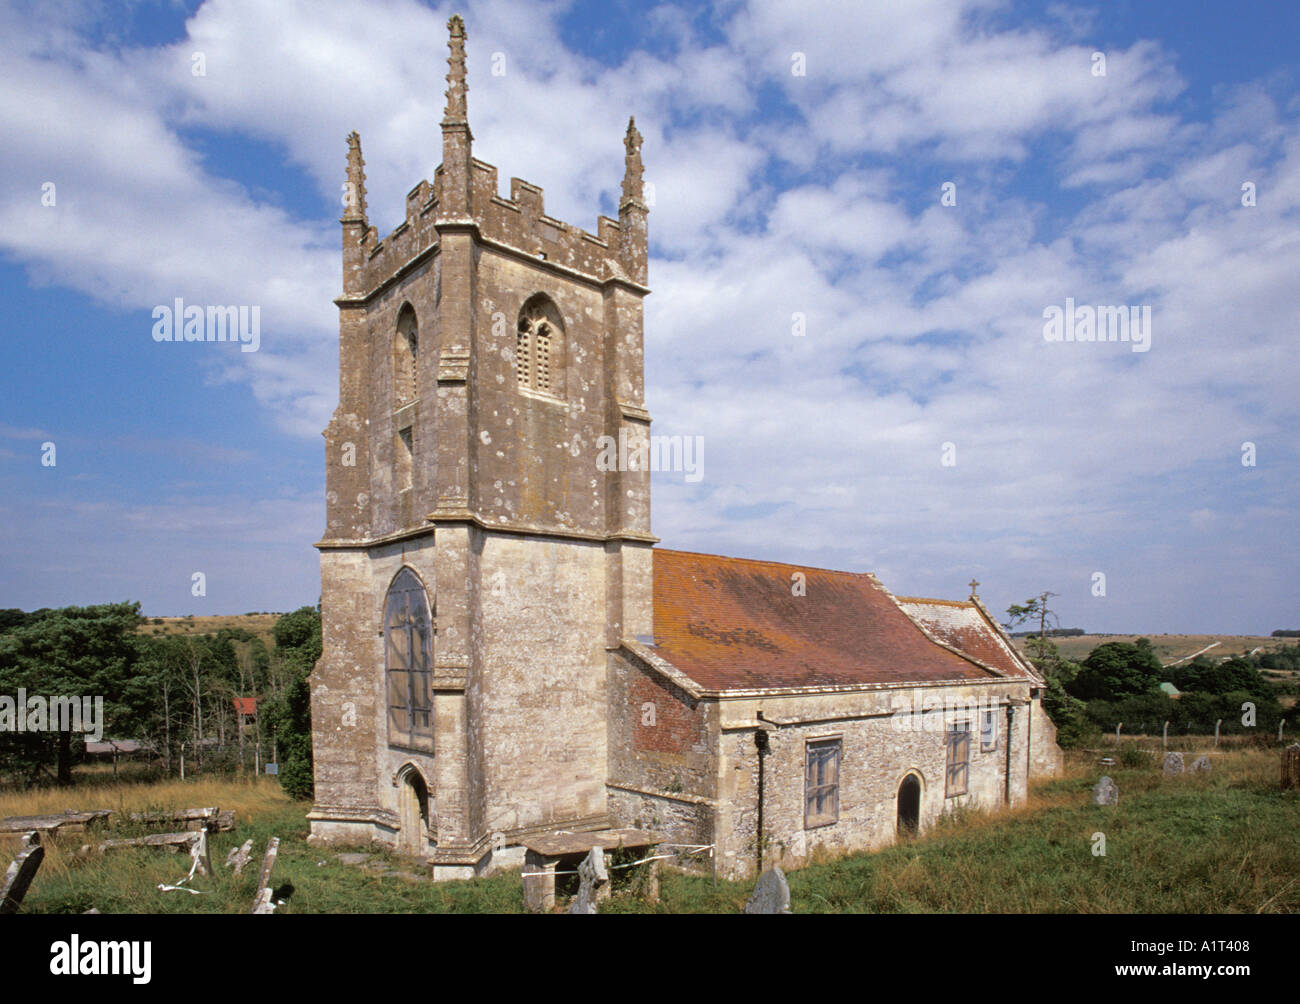 Imber Village Salisbury Plain Wiltshire England Church of St Giles From South West Stock Photo